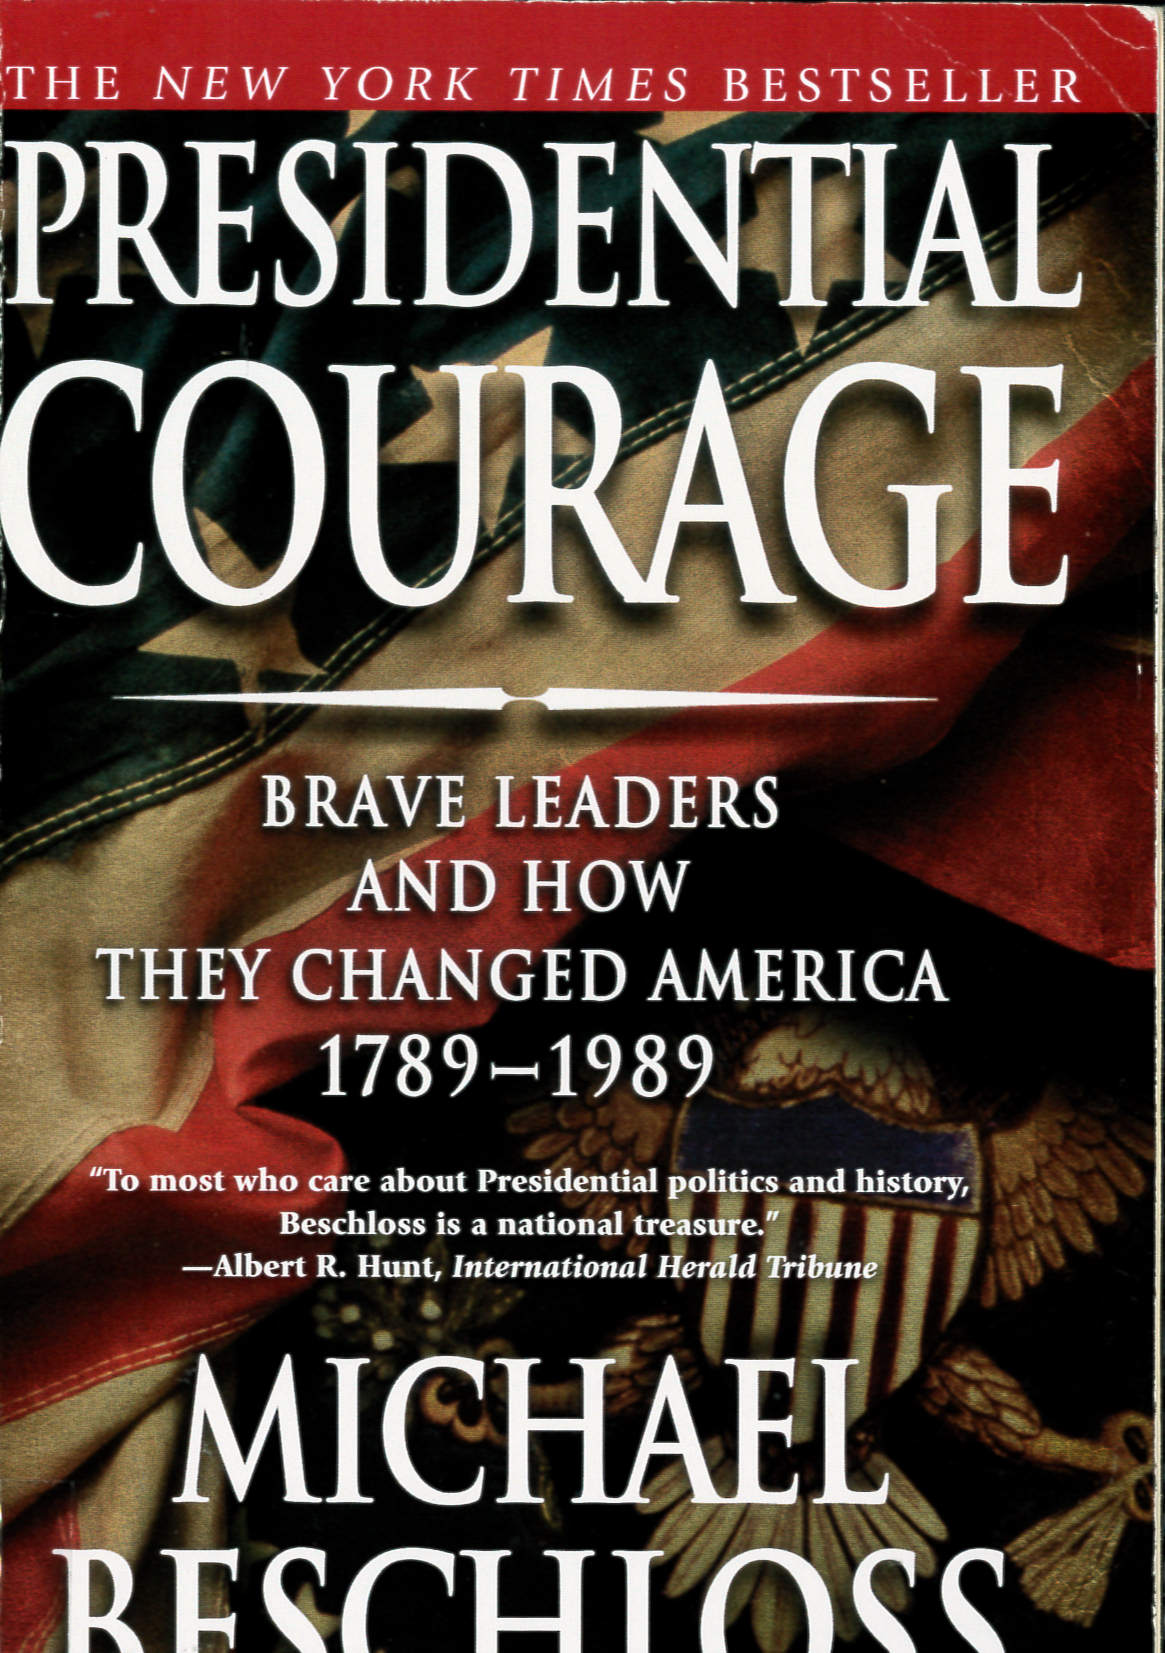 Presidential courage brave leaders and how they changedAmerica, 1789-1989